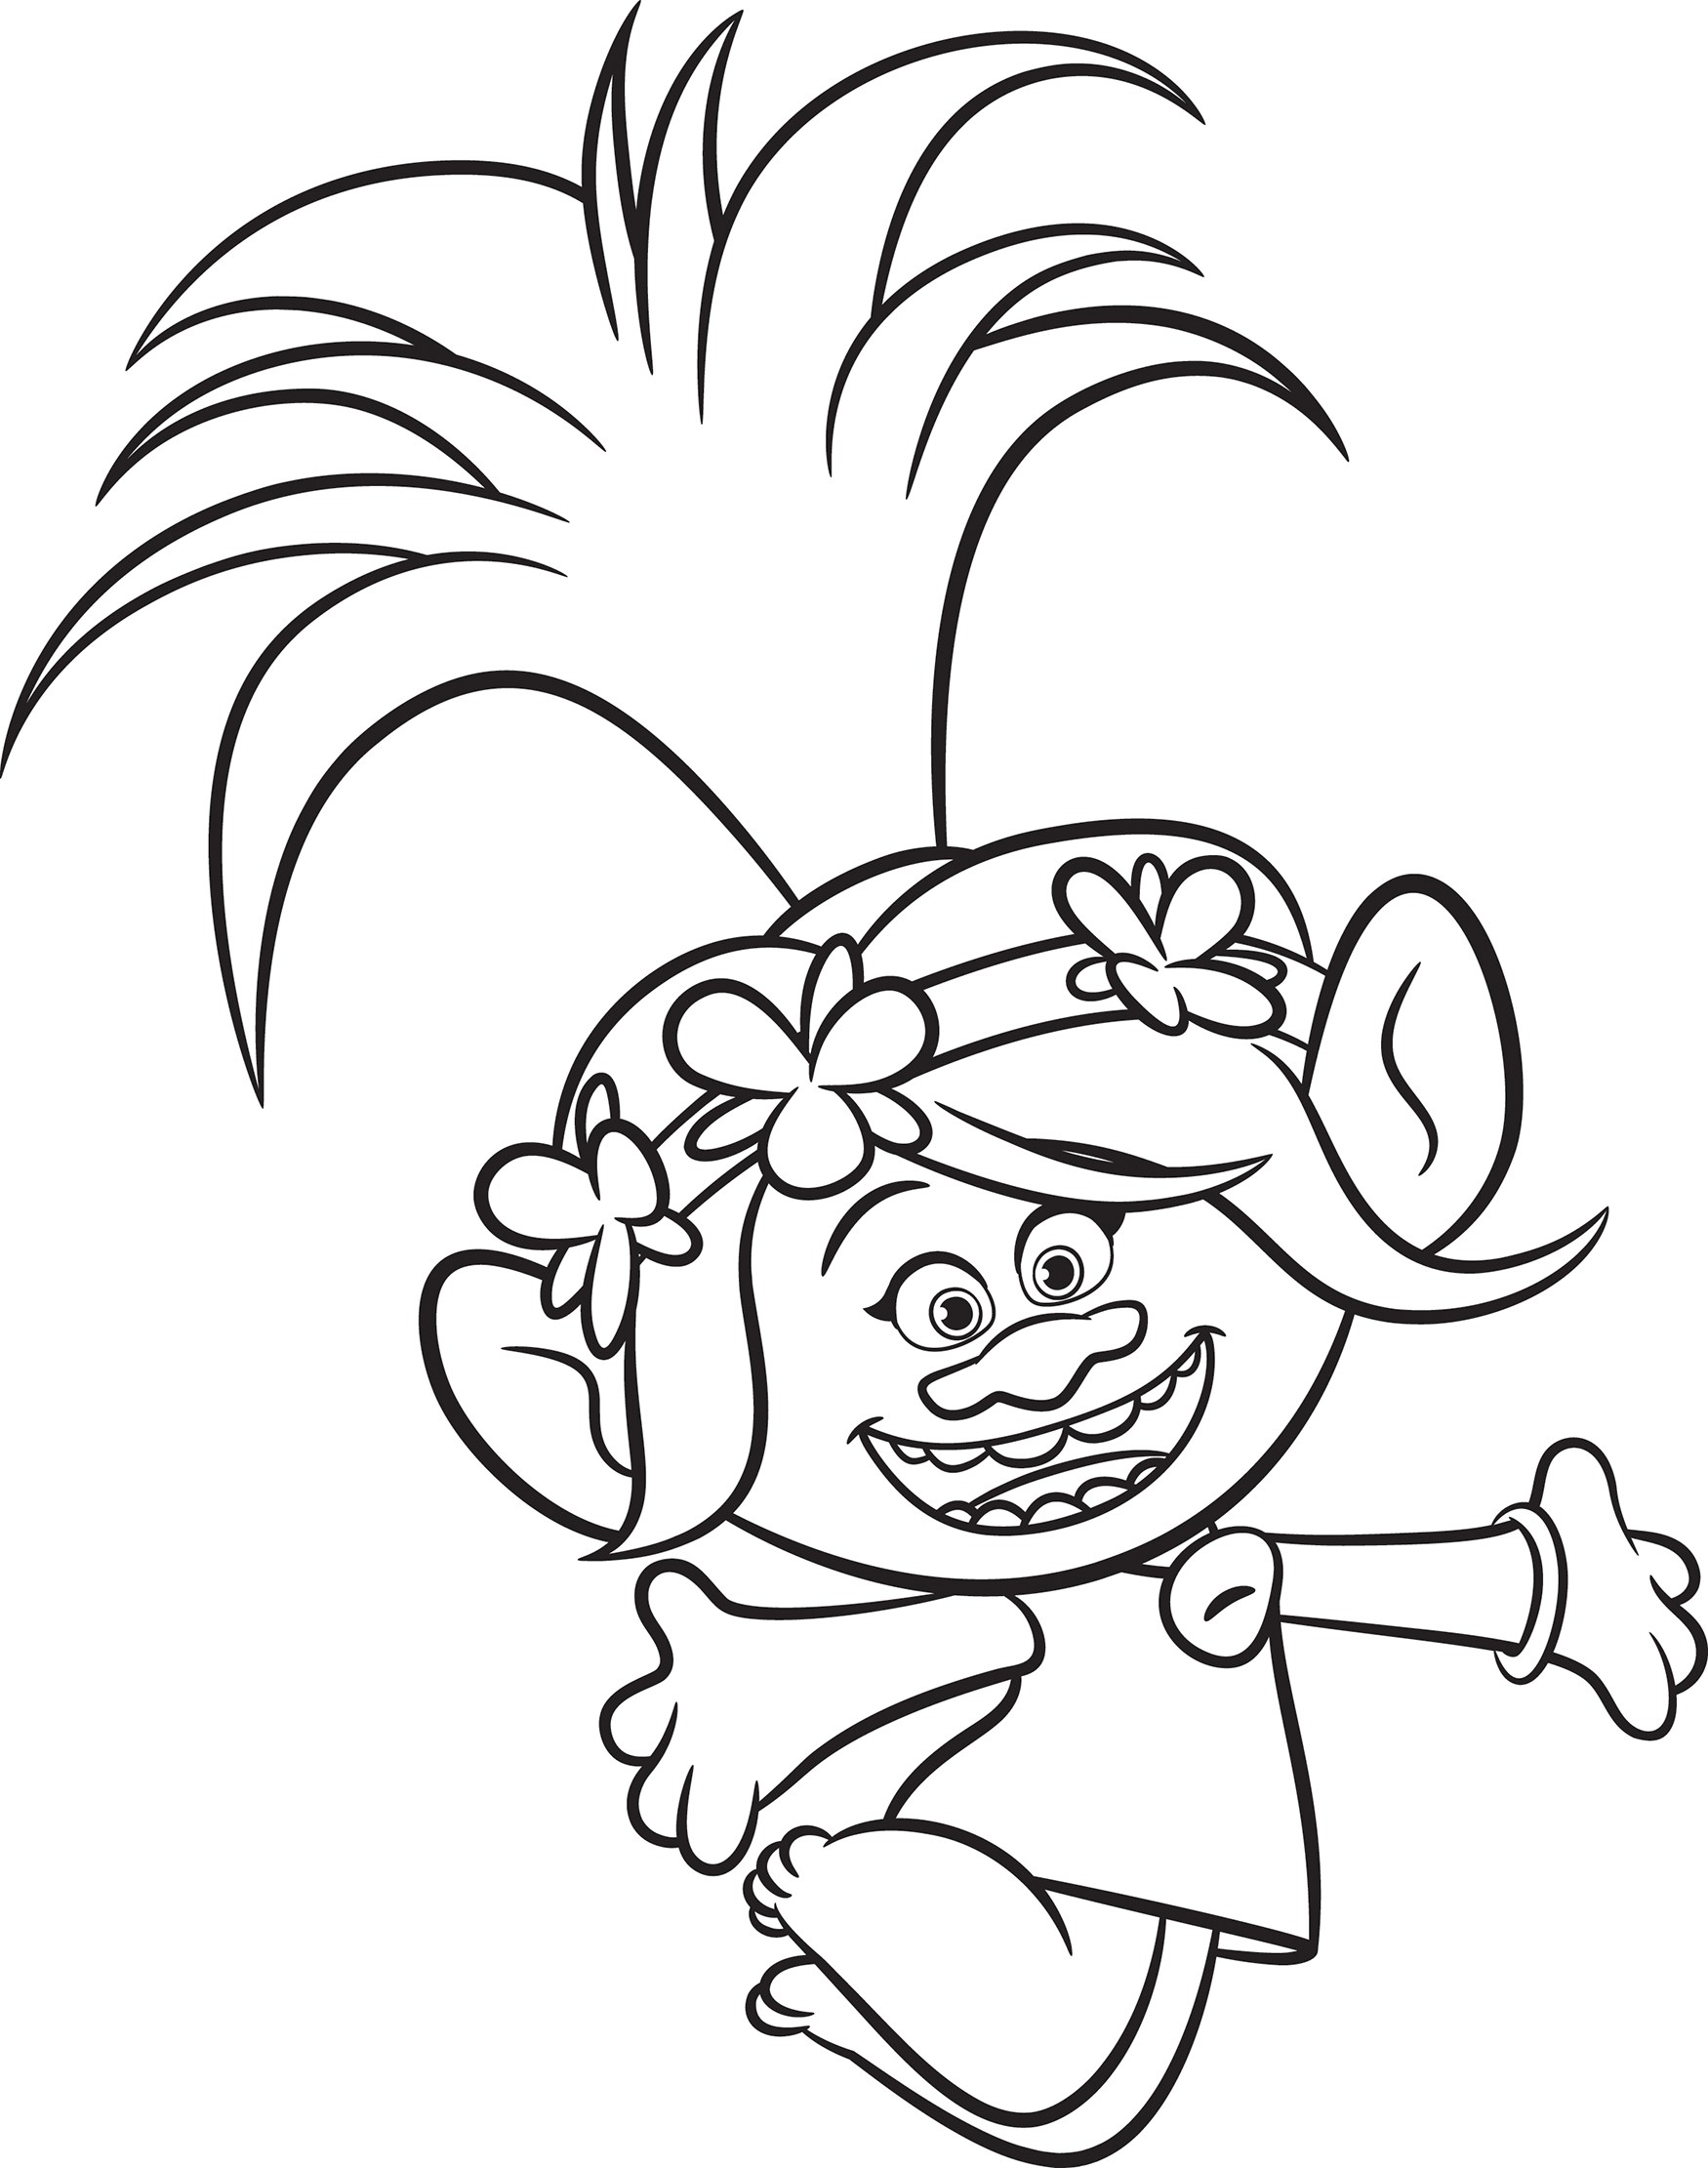 Happy Poppy Coloring Page